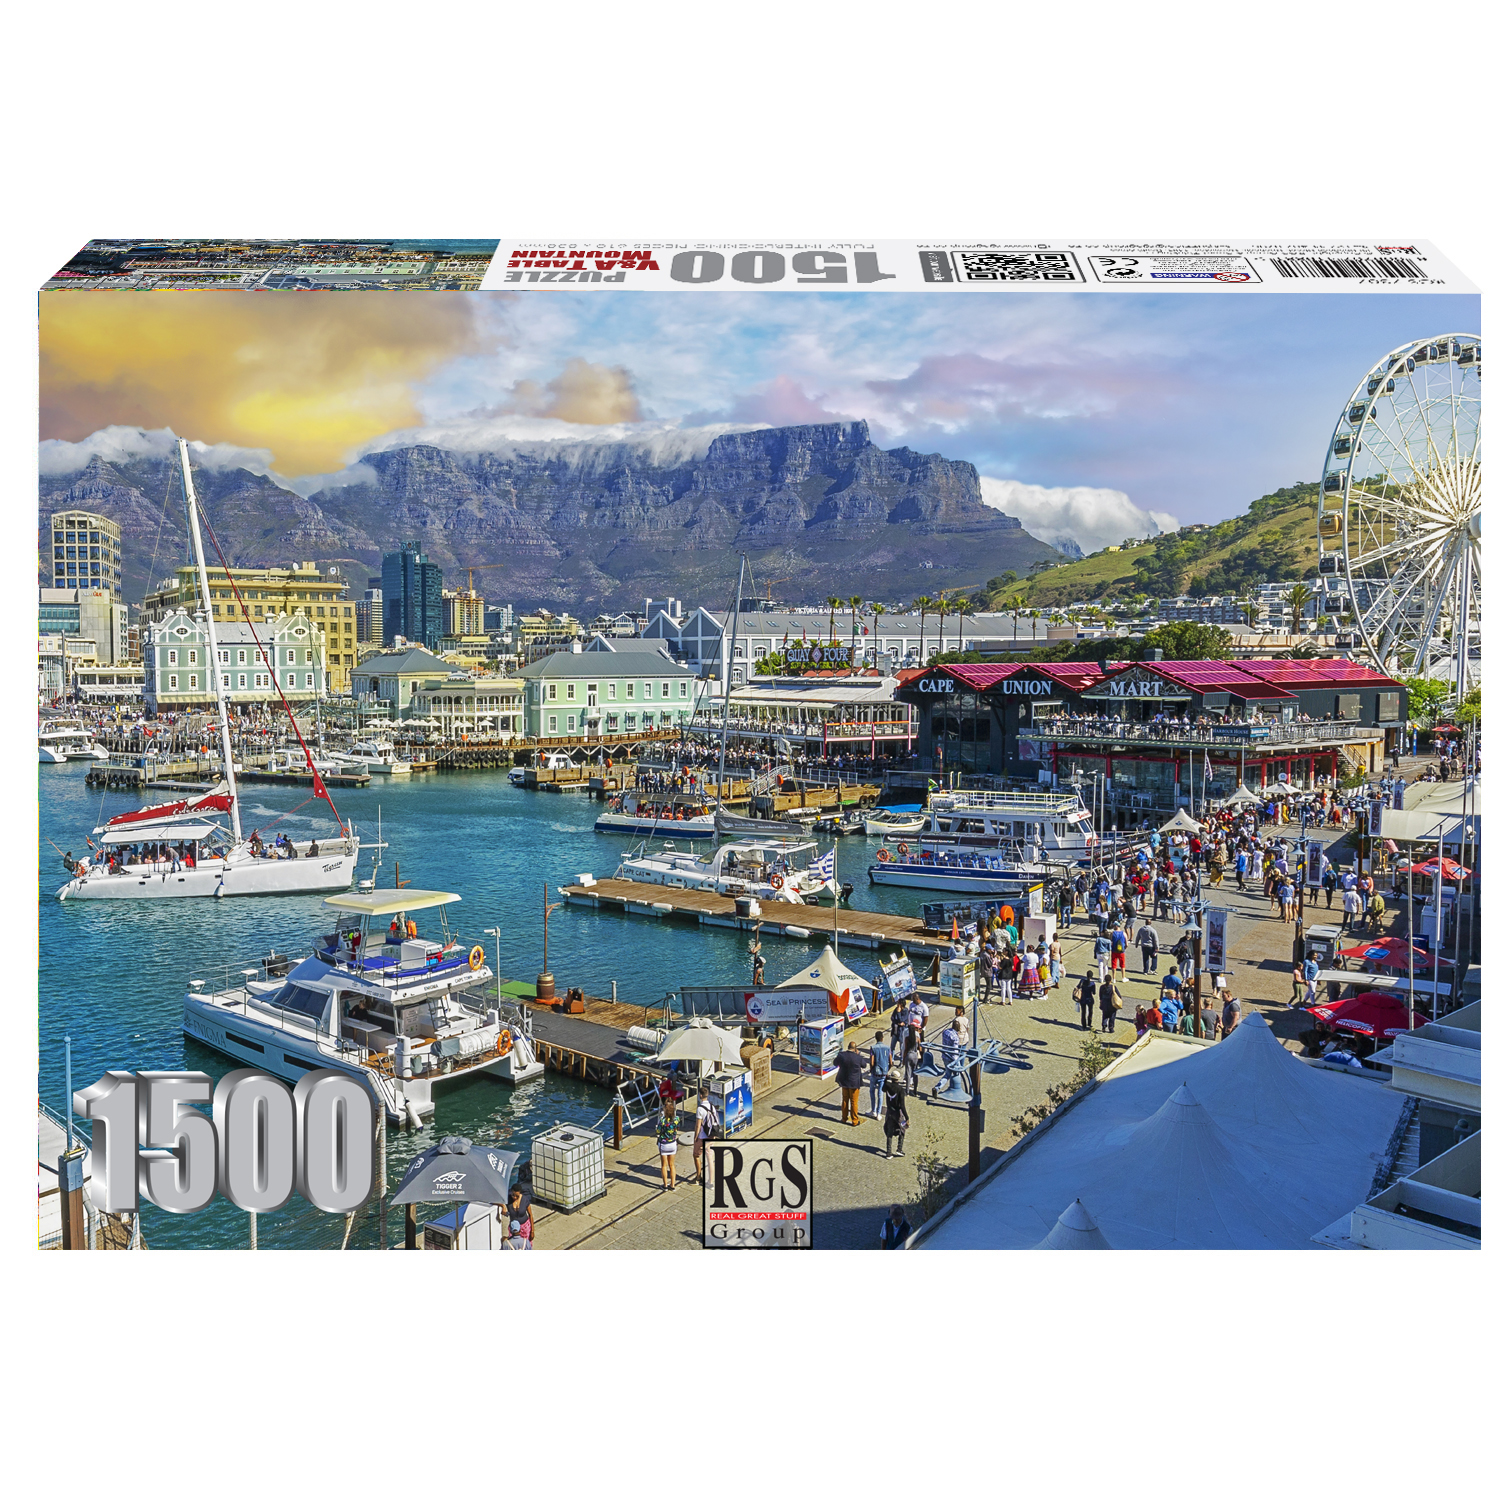 box of 1500pc puzzle of people along V&A with view of Table Mountain